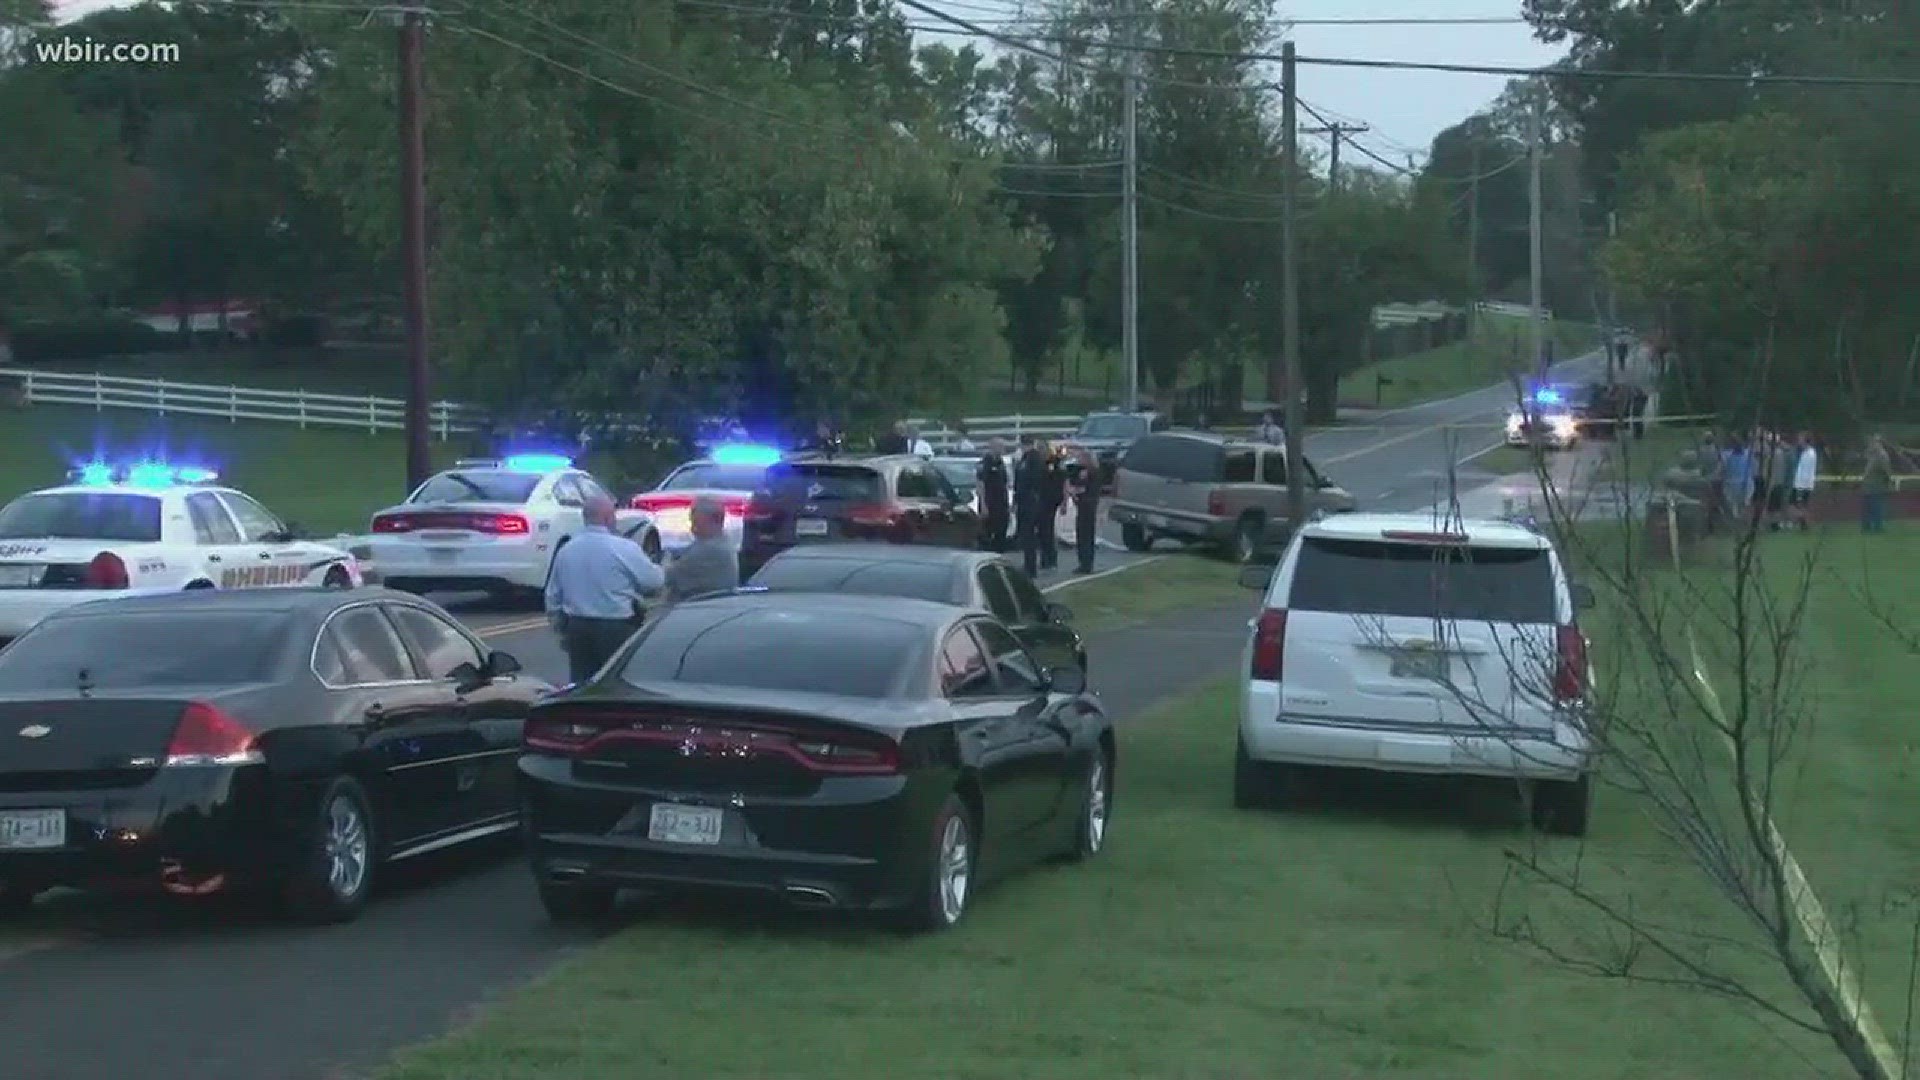 The Knox County Sheriff's Office said a black Ford Mustang chased a white Chrysler Sebring from Clinton Highway to Emory Road, and fired multiple gunshots into the vehicle, killing the driver.